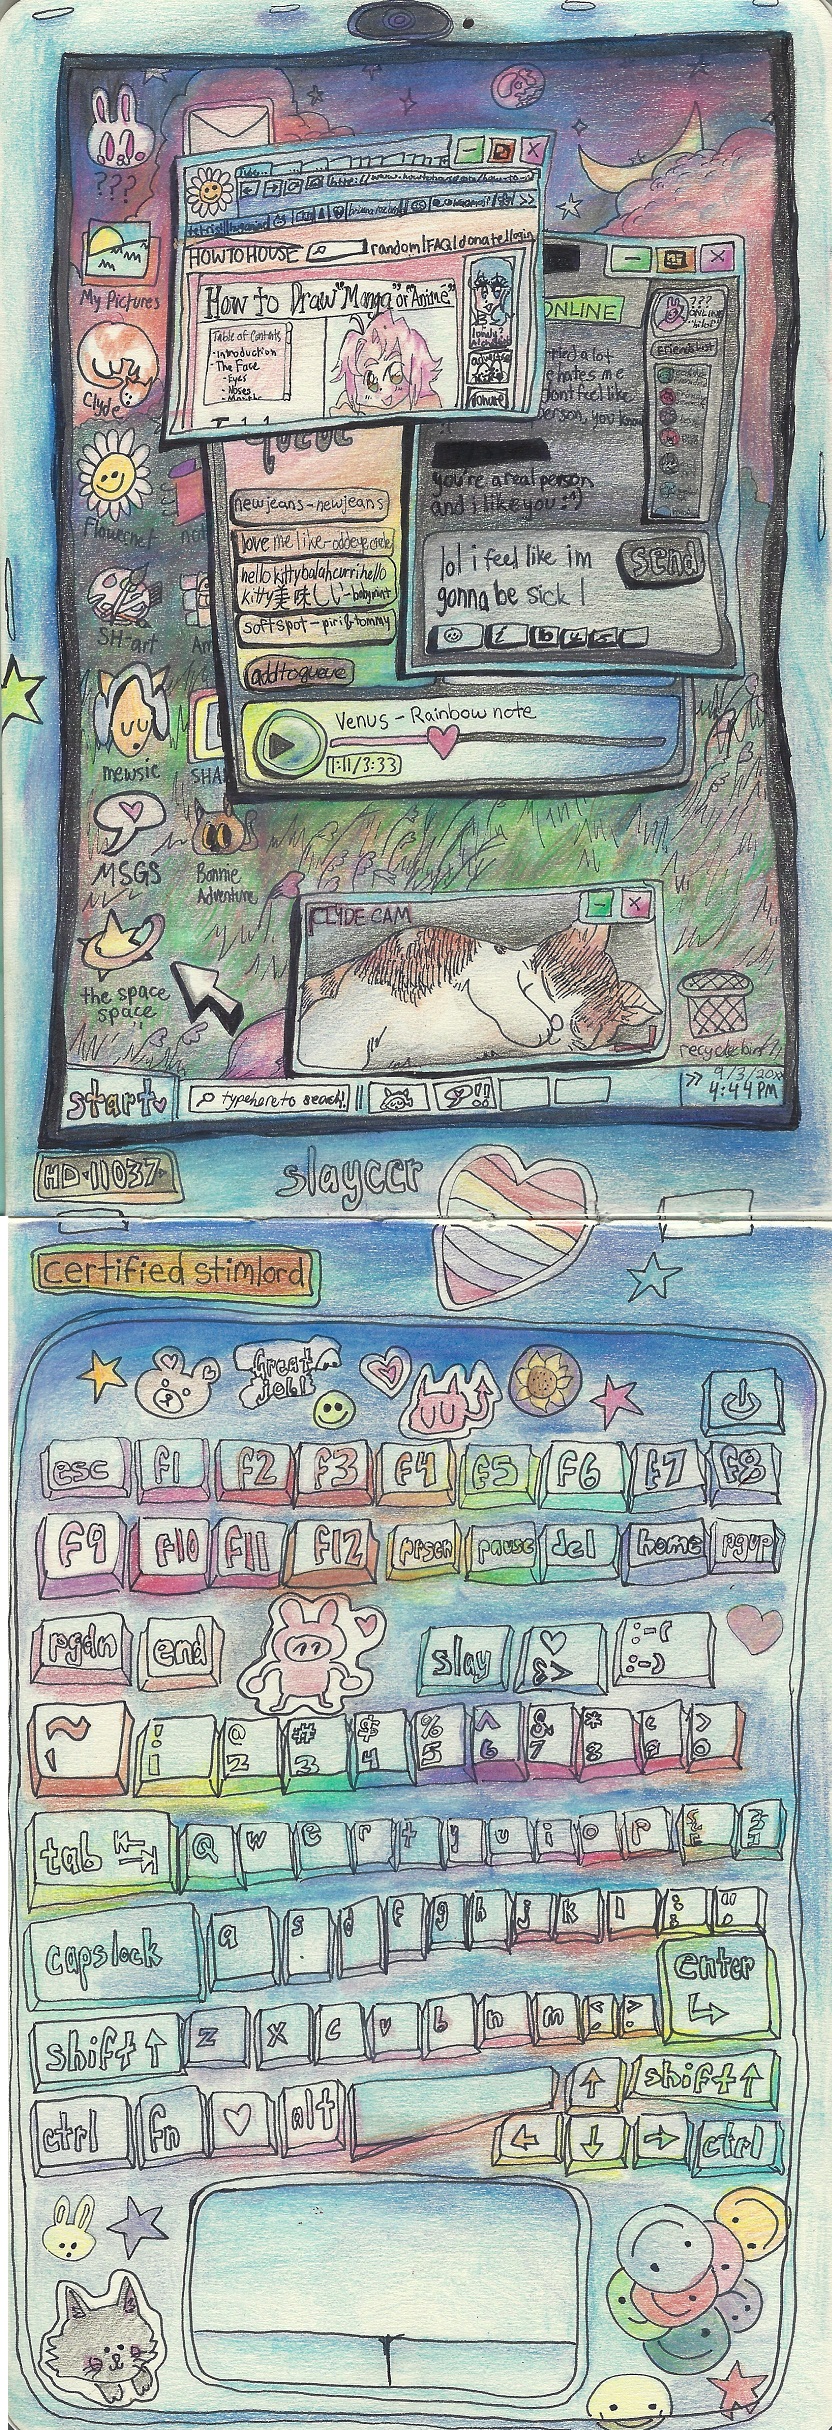 My Laptop 1, 16.6 in. x 5.8 in., colored pencil and ink on paper.